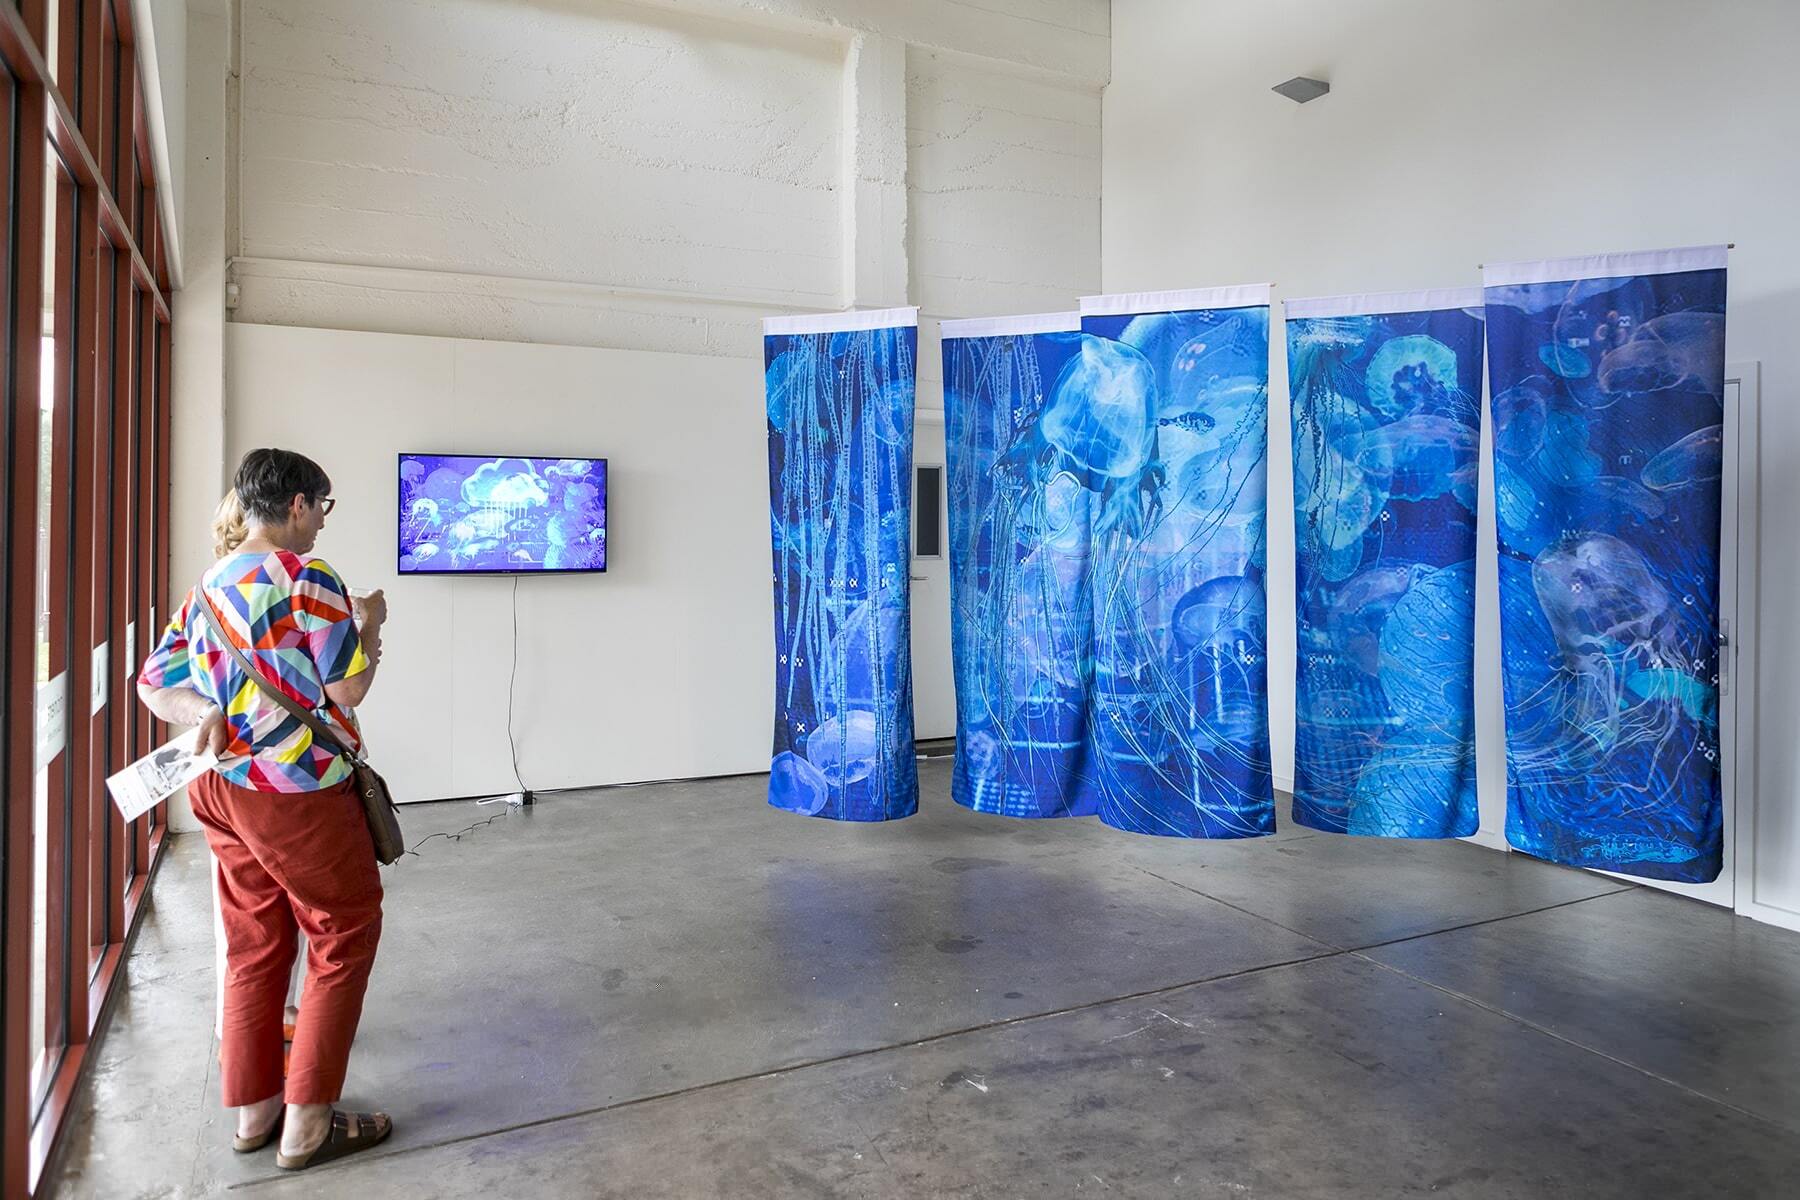 Installation view of SWARM at Incinerator Gallery, Melbourne